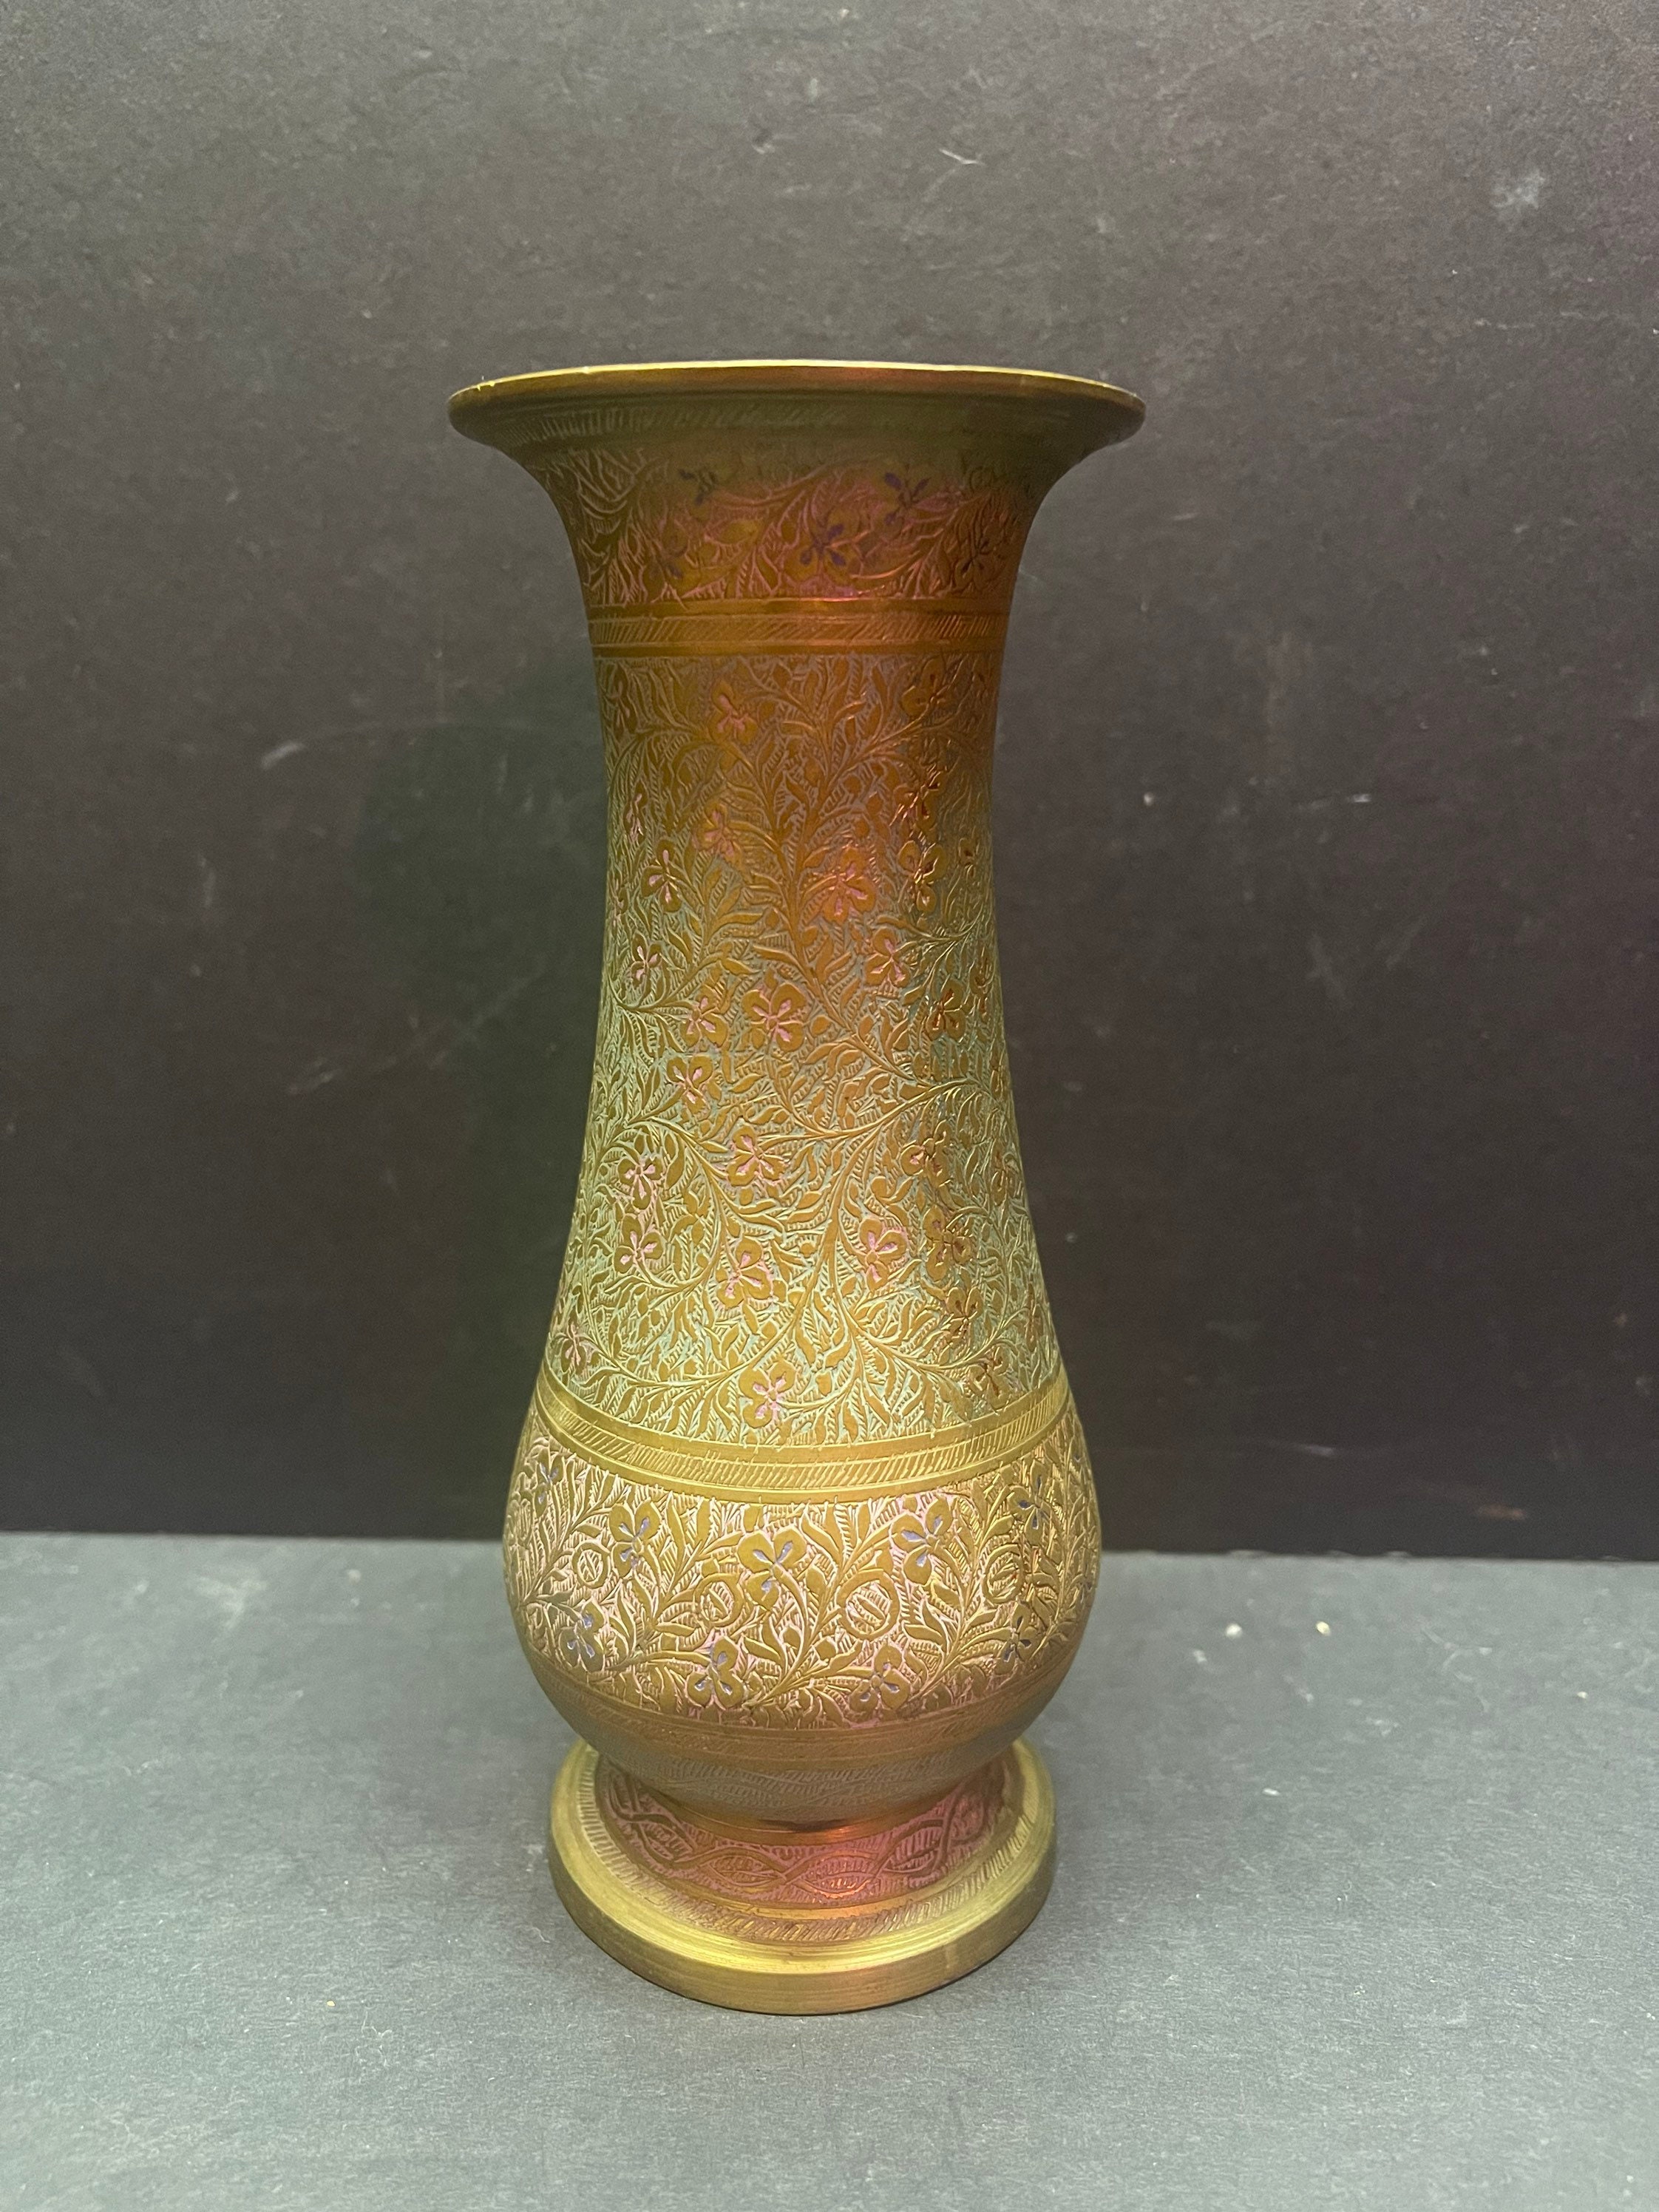 Brass and Enamel Vase / Dot Pick Marks India 226 C 117 / Unknown Age